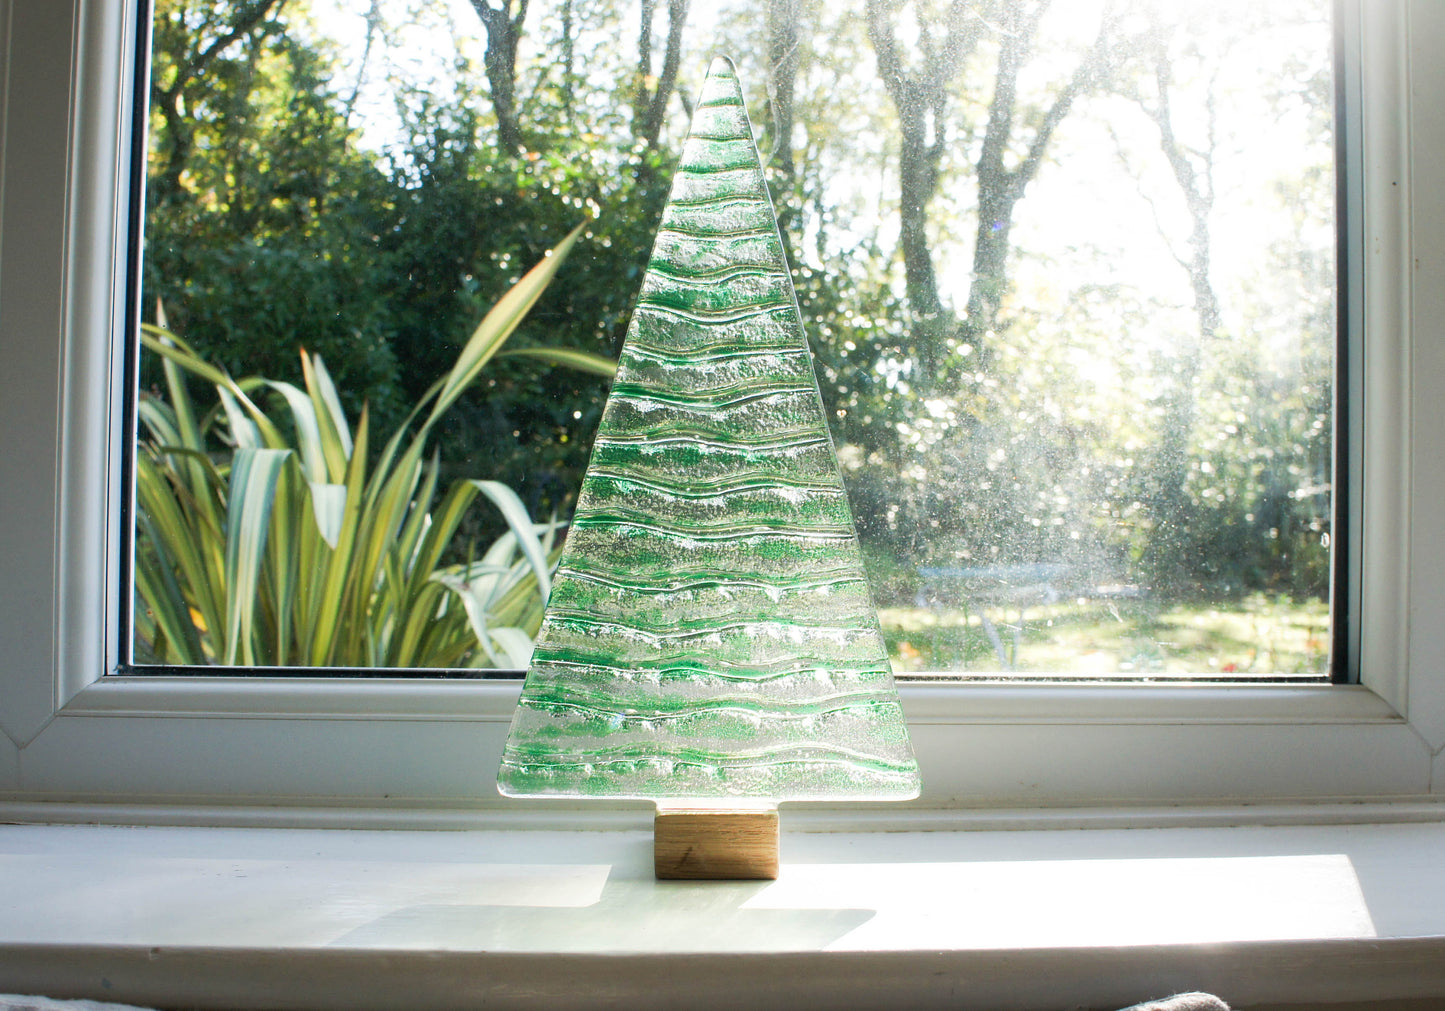 XL Green Glass Tree - Freestanding - 32cm/12 1/2" with wooden block